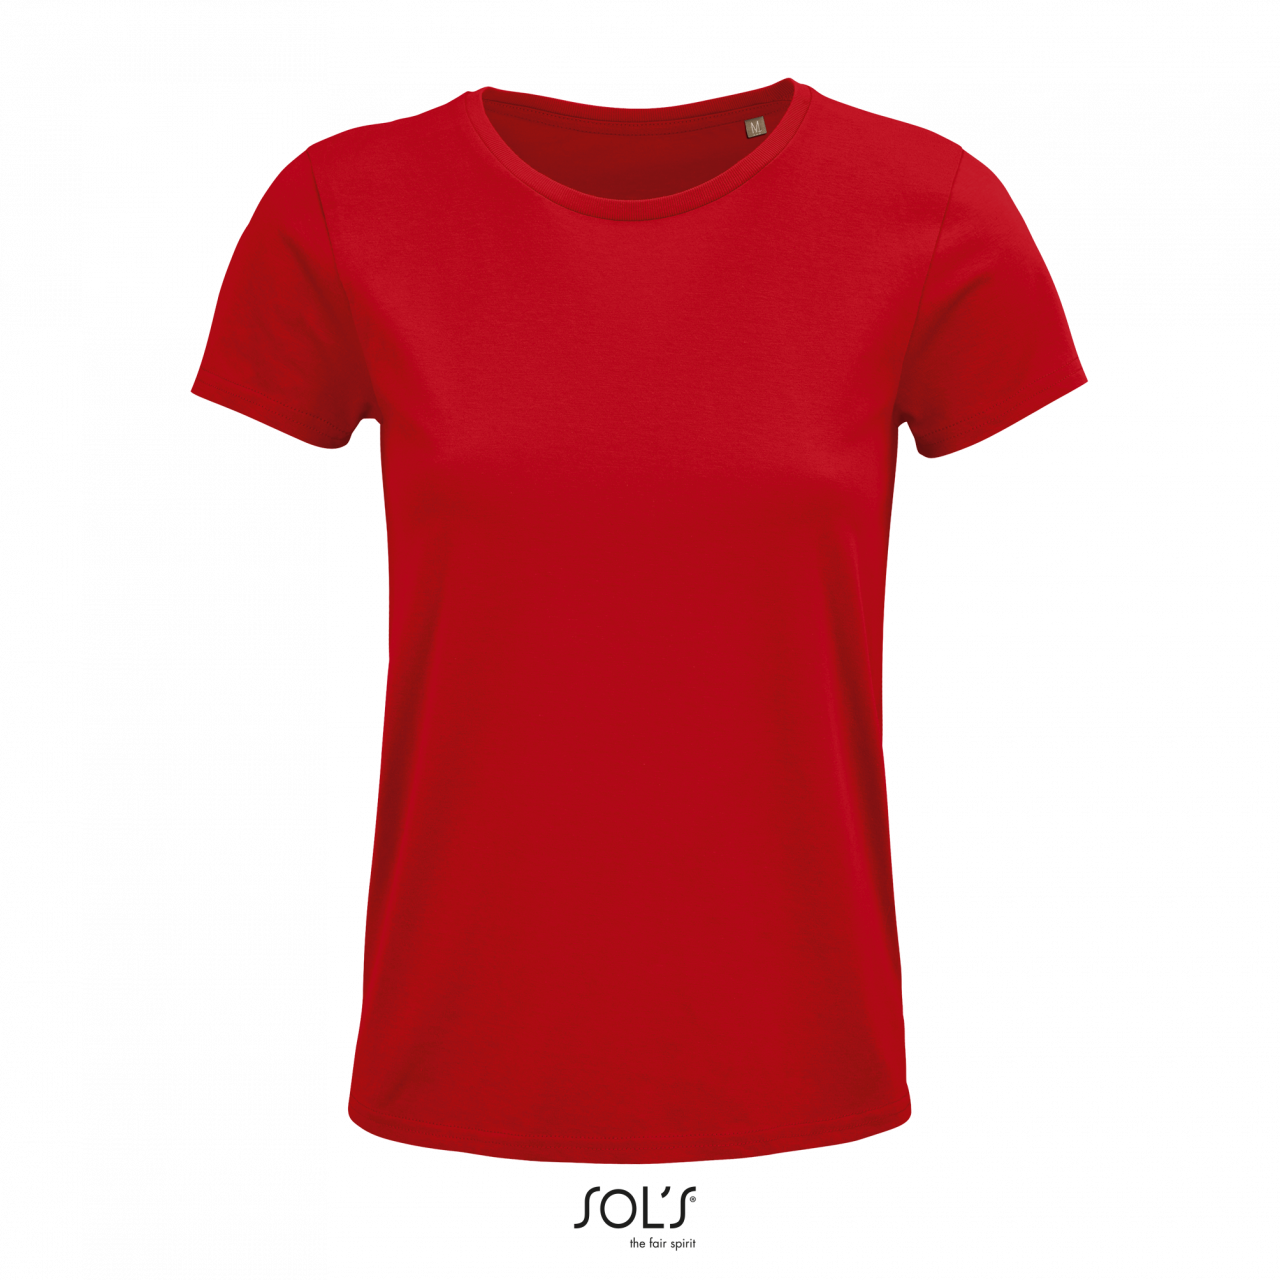 Sol's Crusader Women - Round-neck Fitted Jersey T-shirt - Sol's Crusader Women - Round-neck Fitted Jersey T-shirt - Red